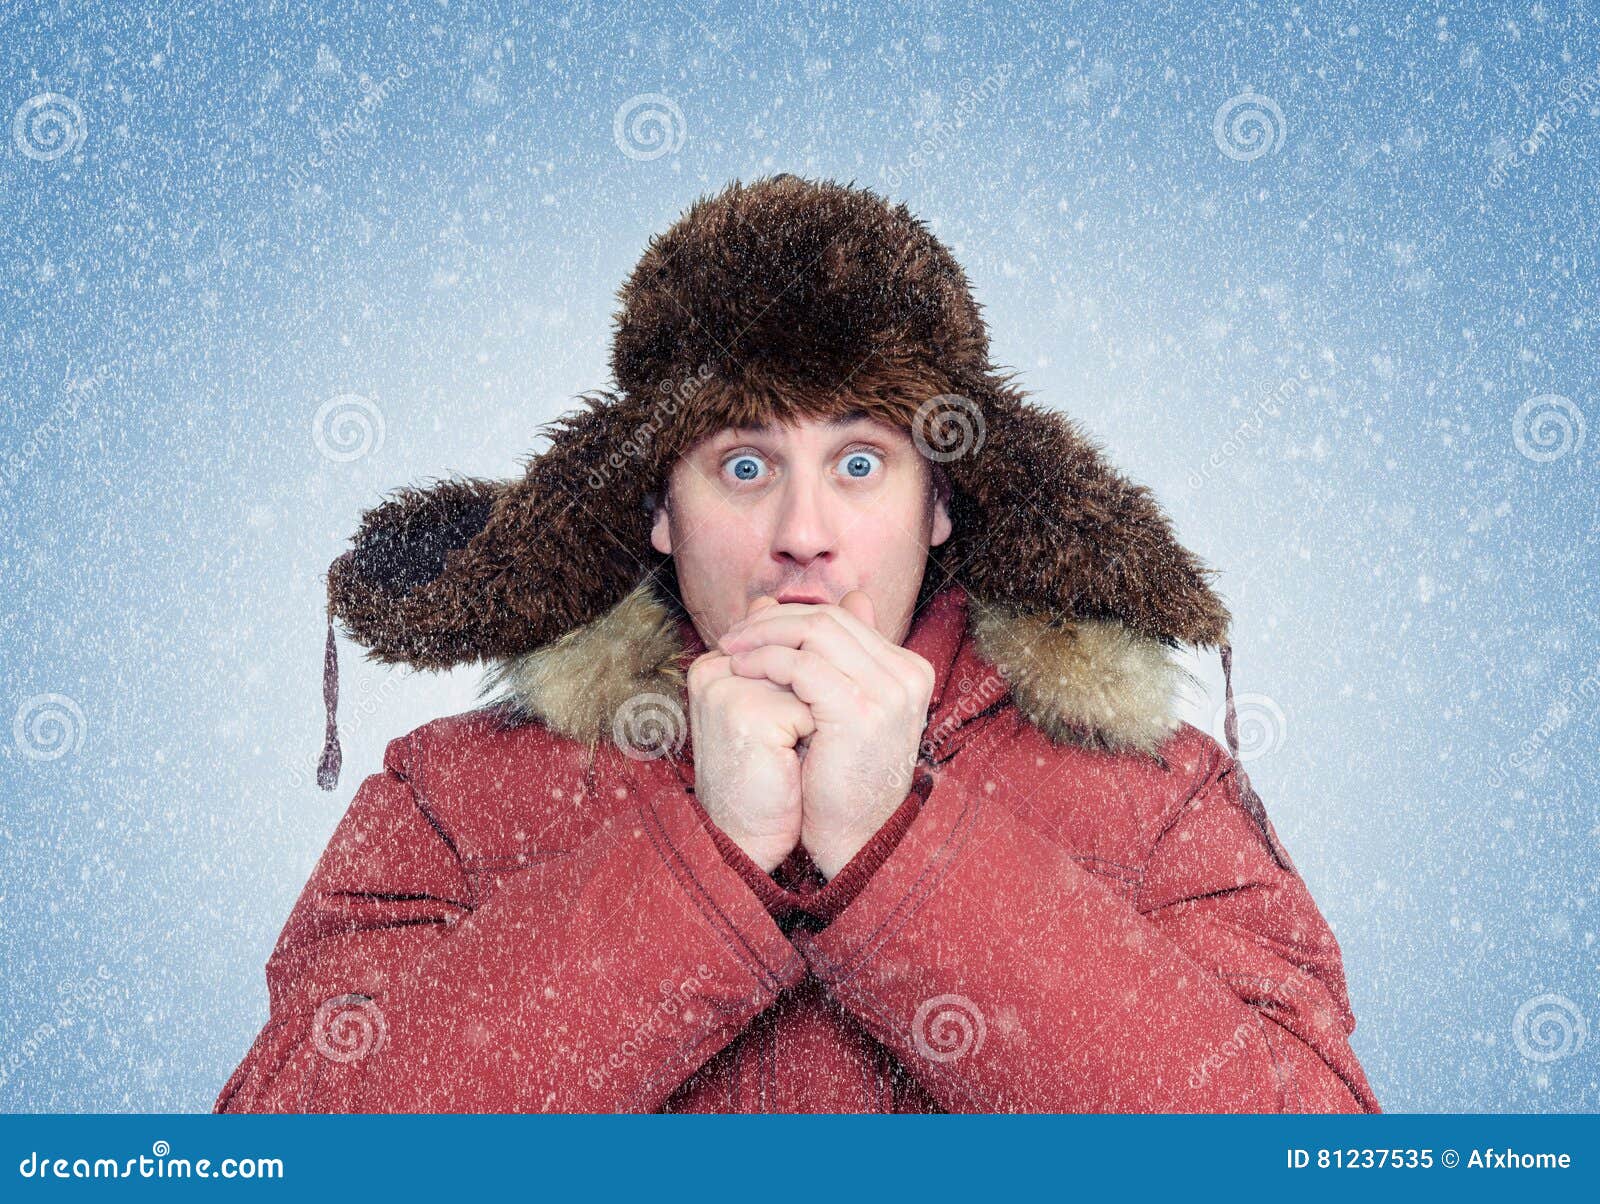 frozen man in winter clothes warming hands, cold, snow, blizzard